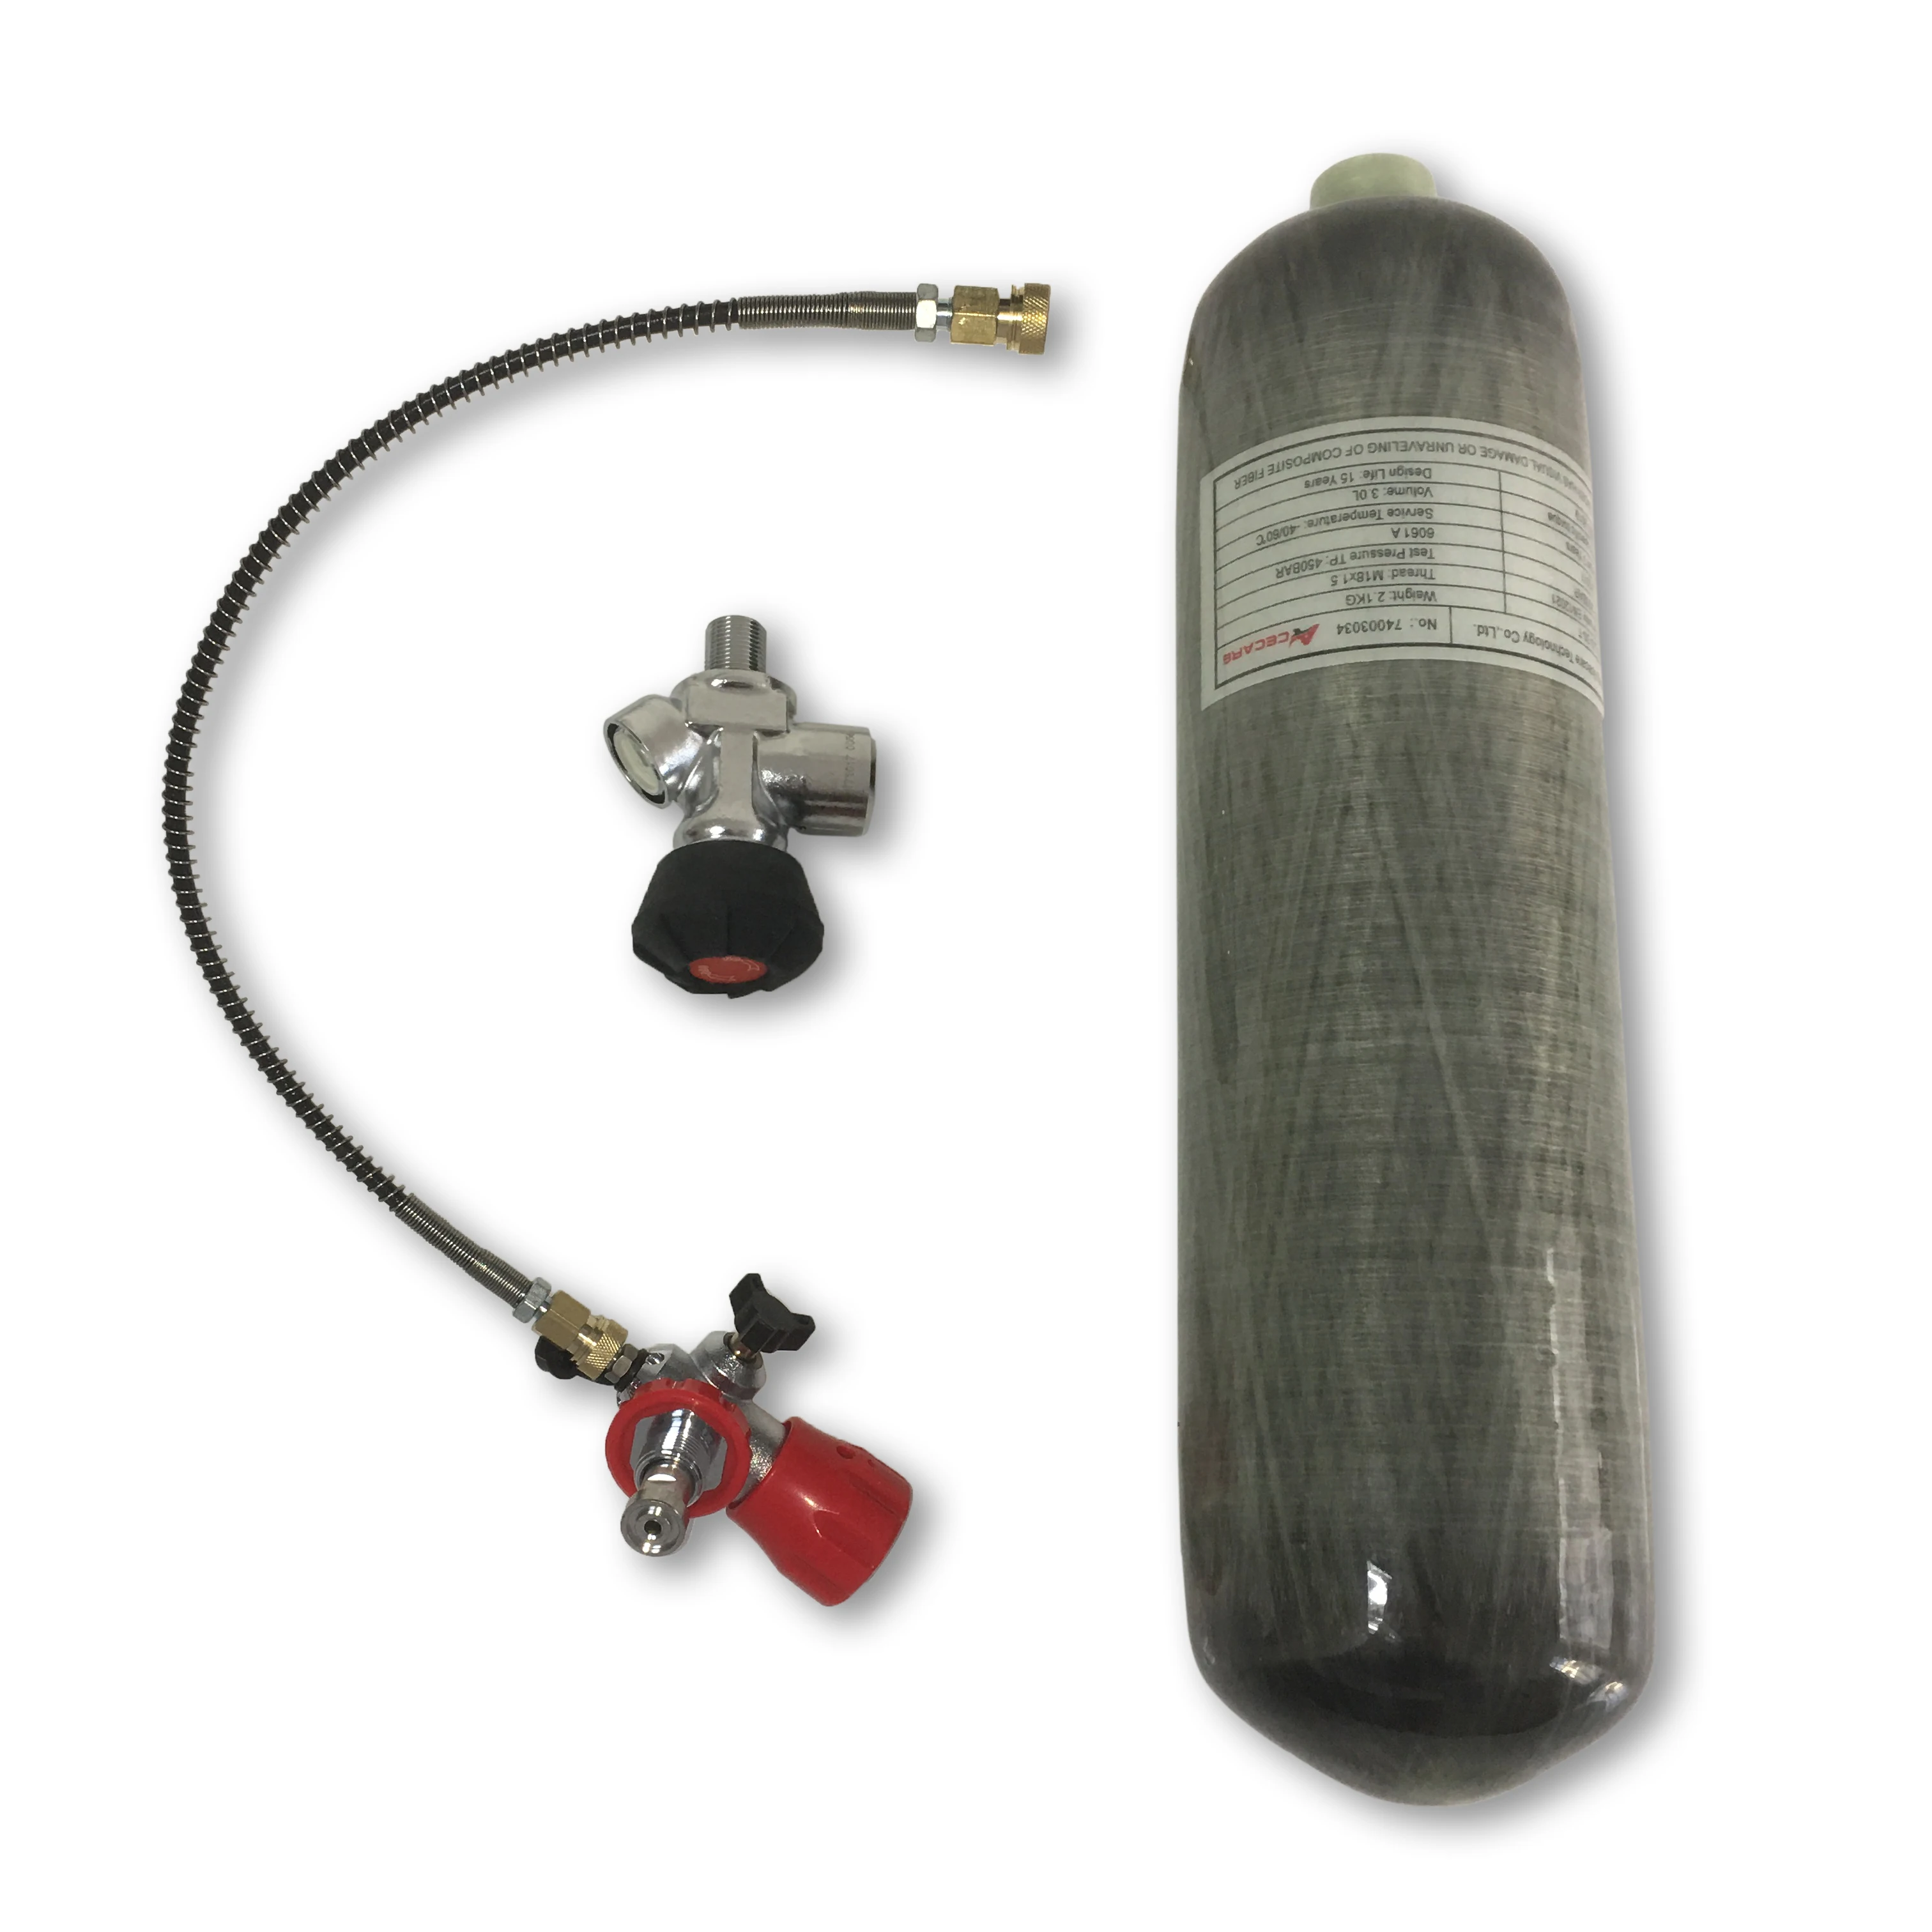 ACECARE 2L CE High Pressure Gas Air Tank 300Bar 4500Psi With Valve and Filing Station For Diving